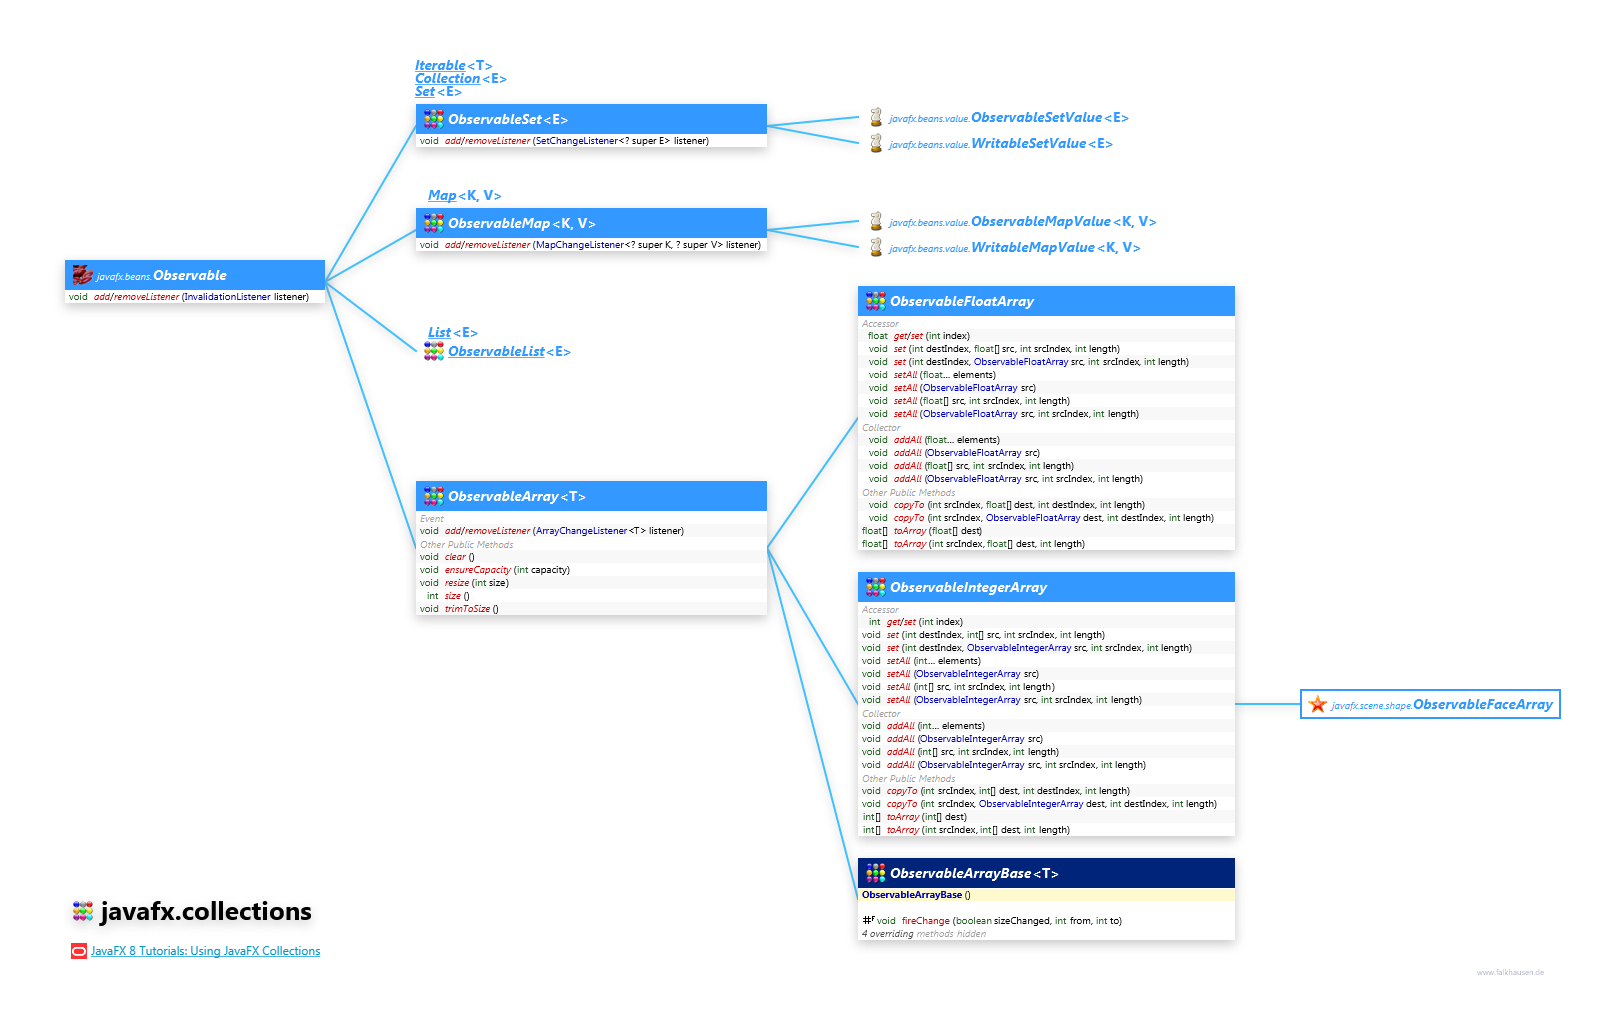 javafx.collections Observable Collection class diagram and api documentation for JavaFX 8